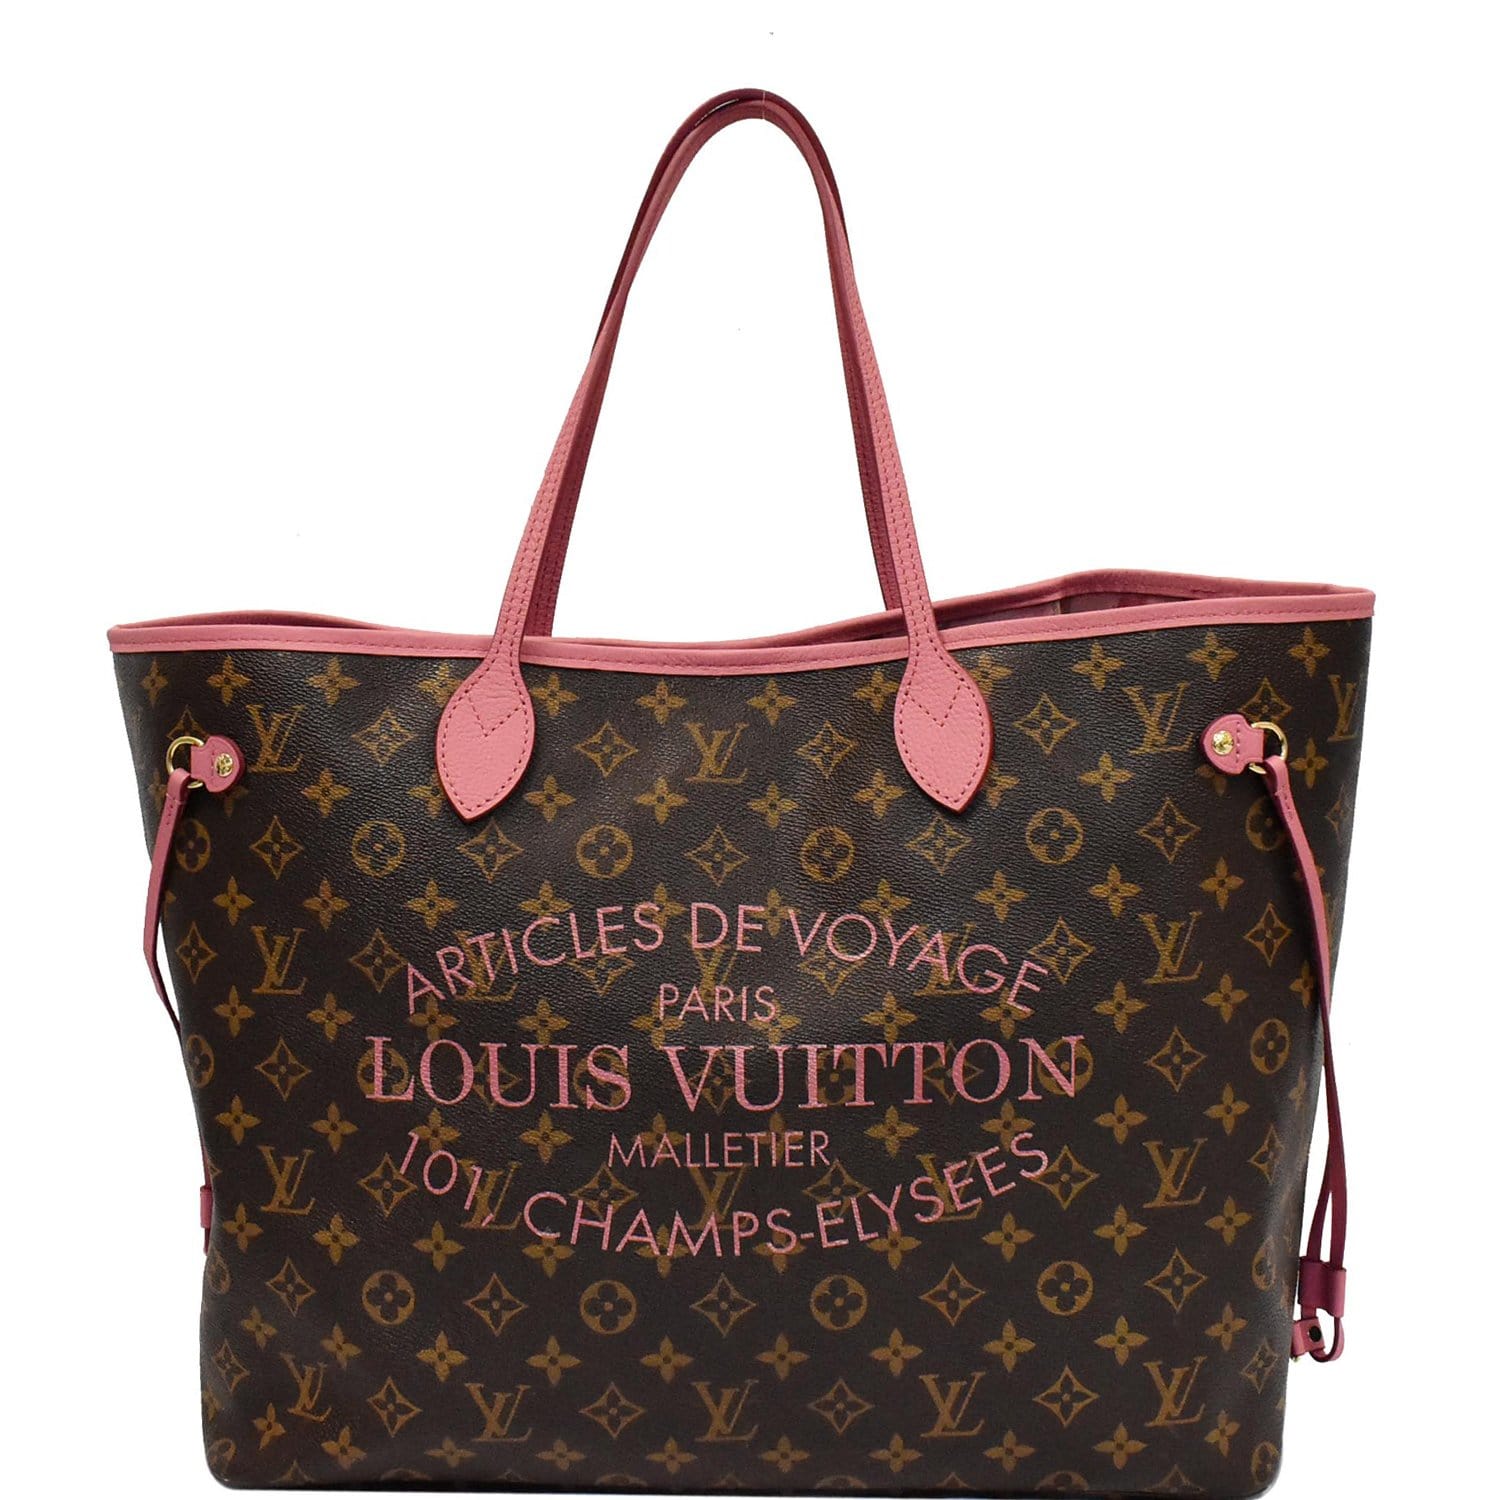 lv tote bag limited edition